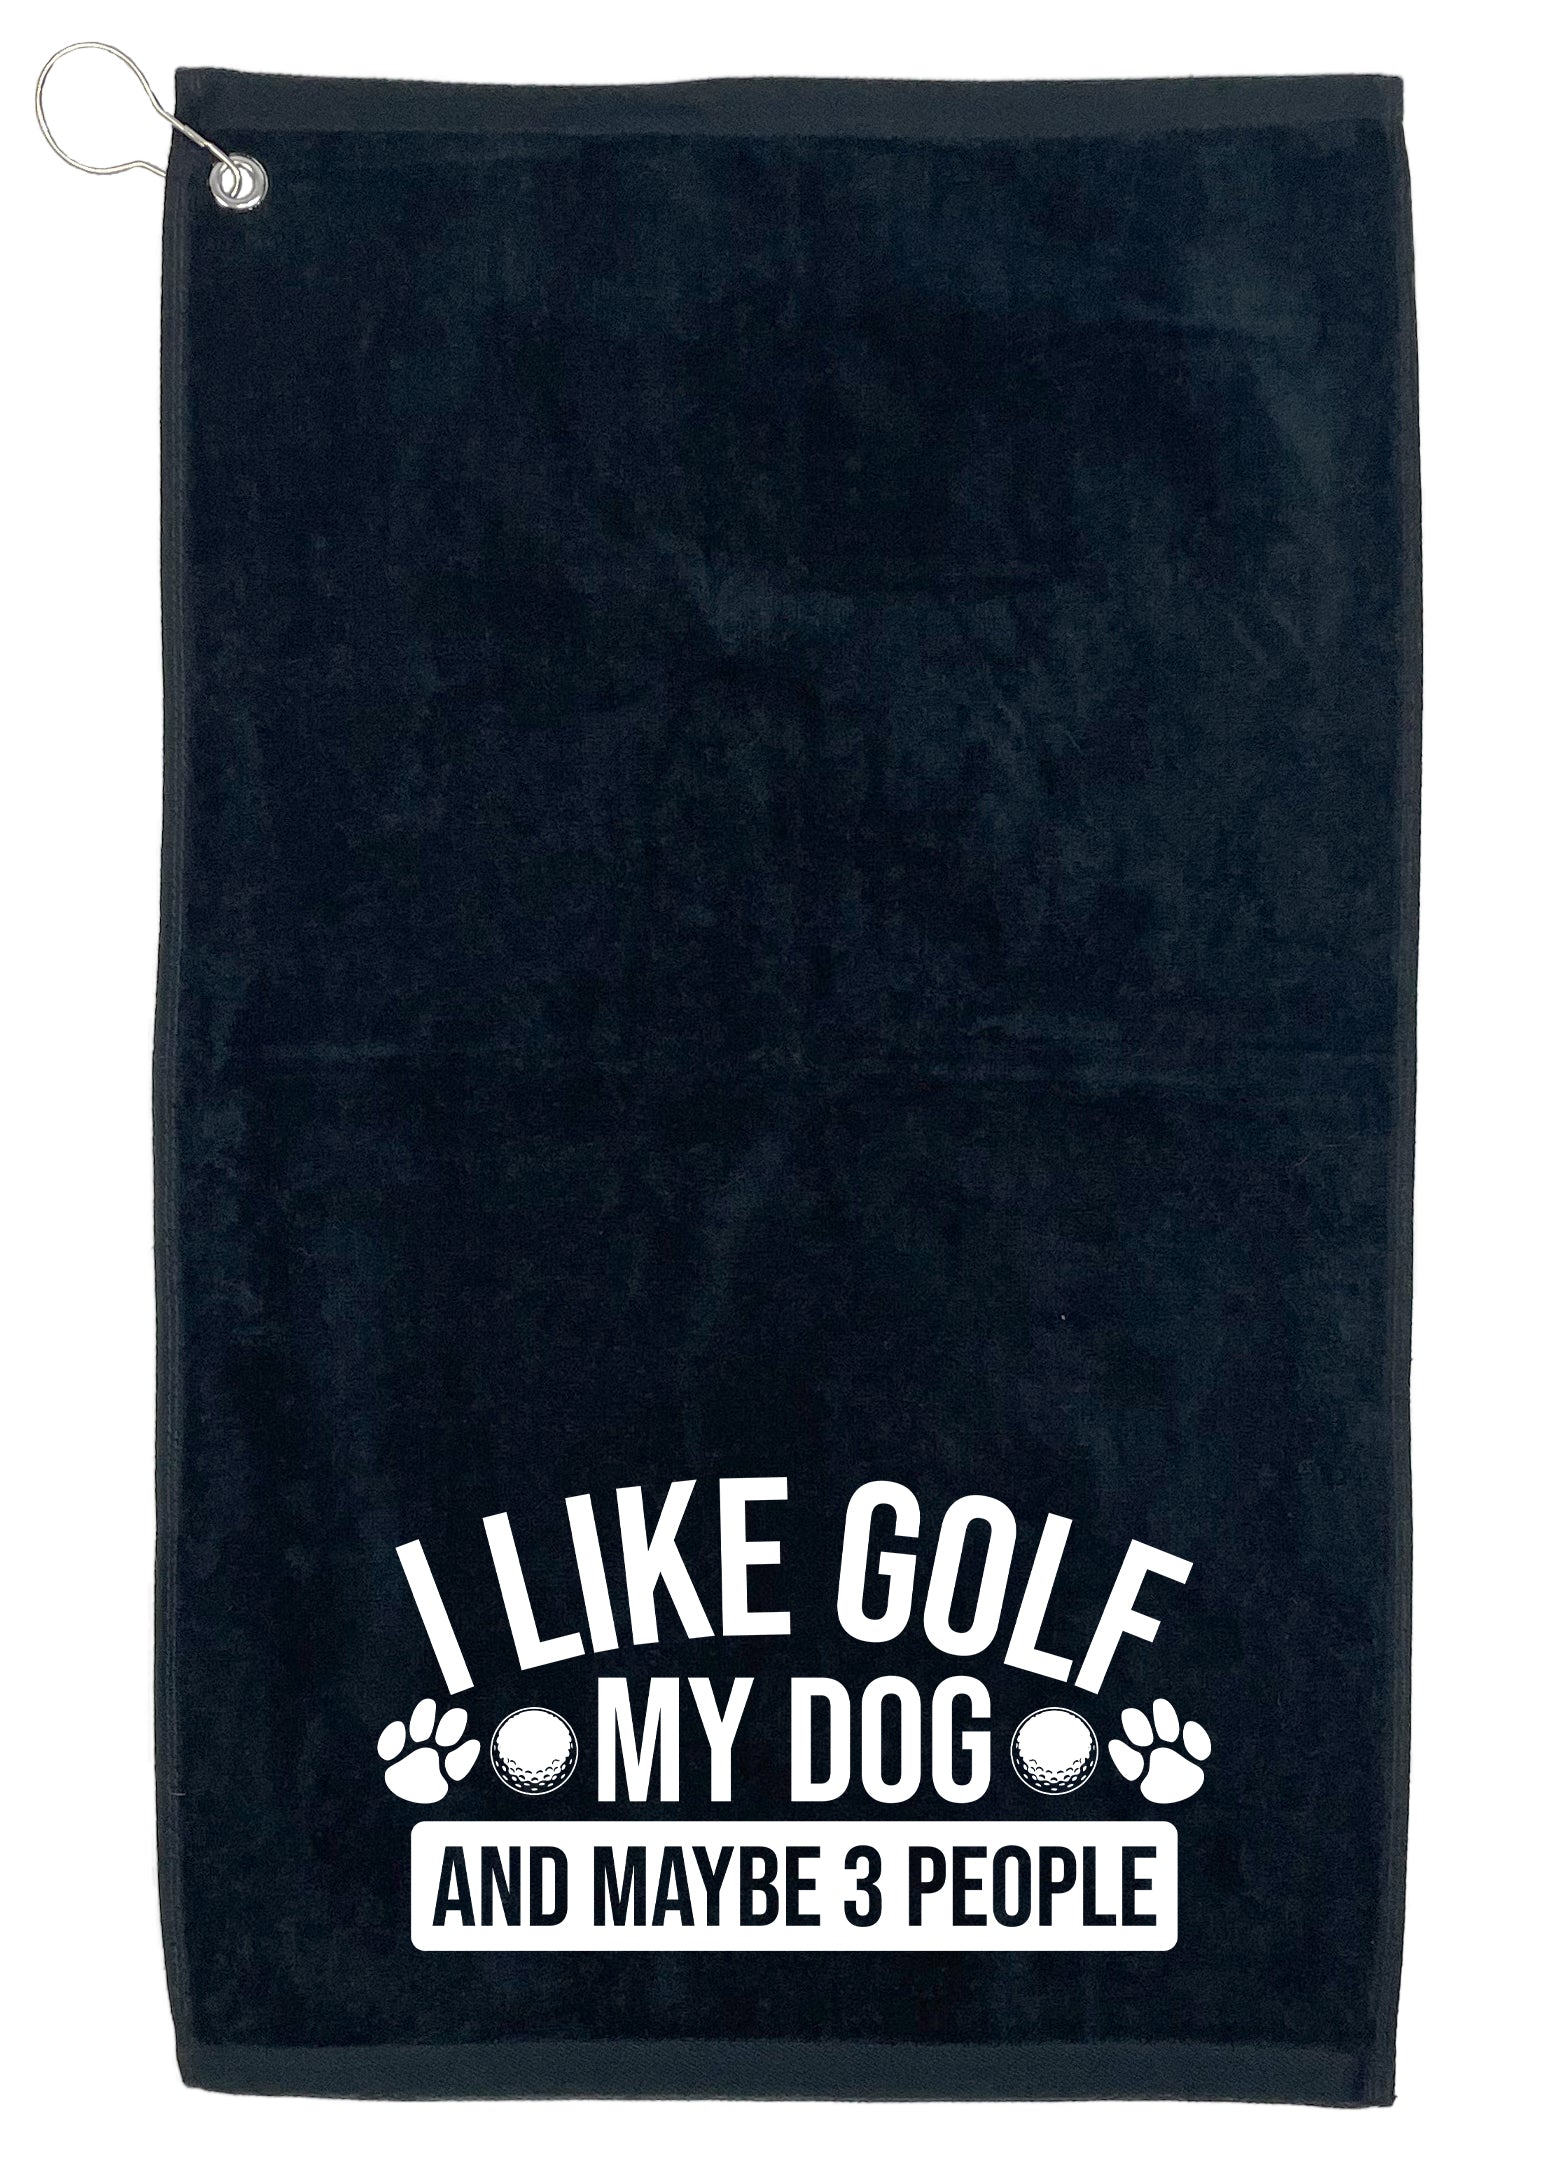 I Love Golf, My Dog And Maybe 3 People, Golf Towel